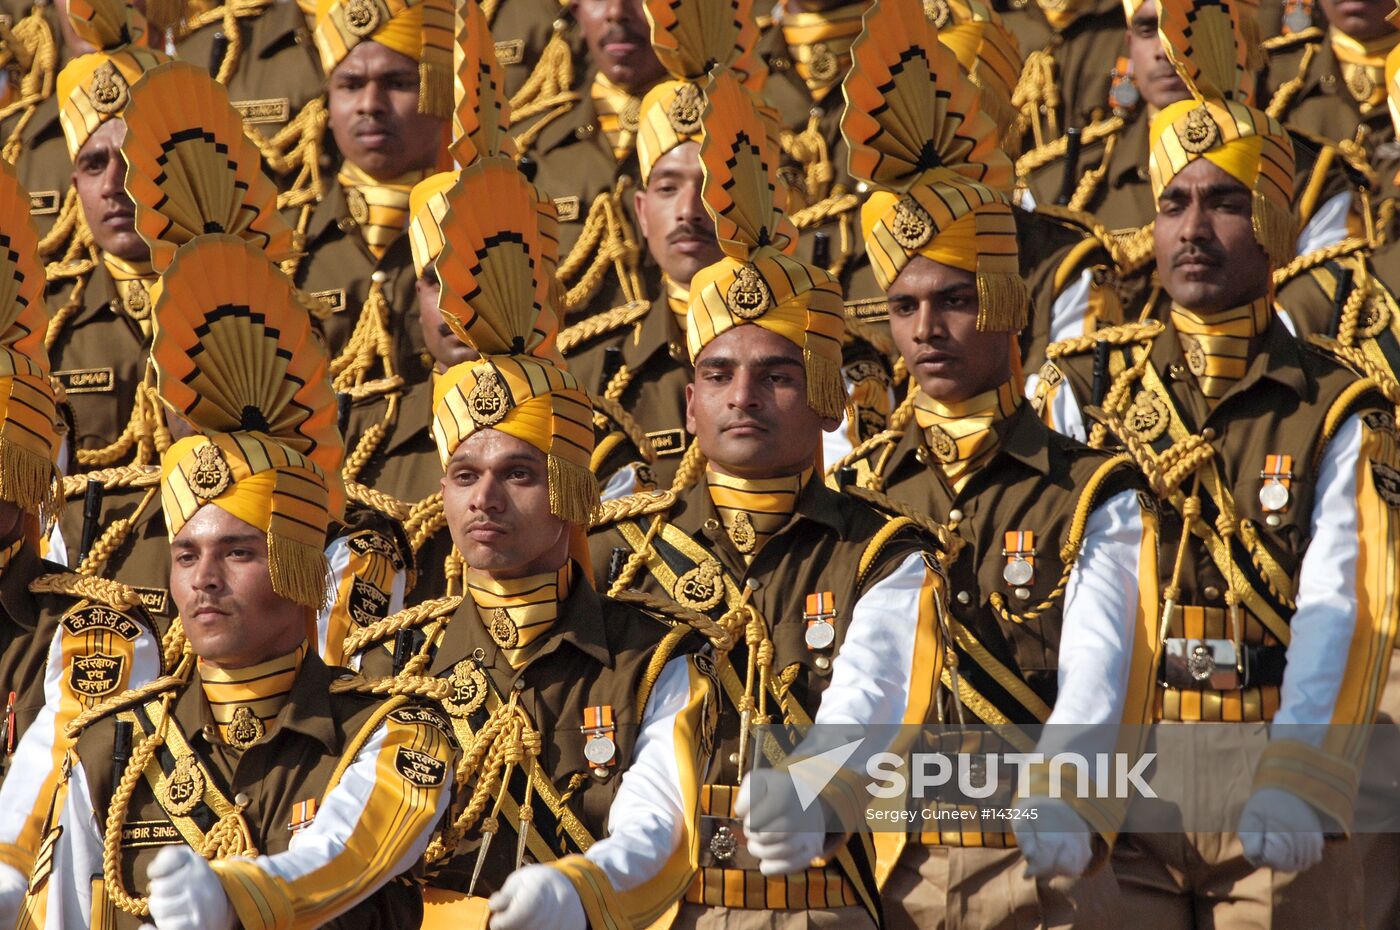 MILITARY PARADE IN INDIA